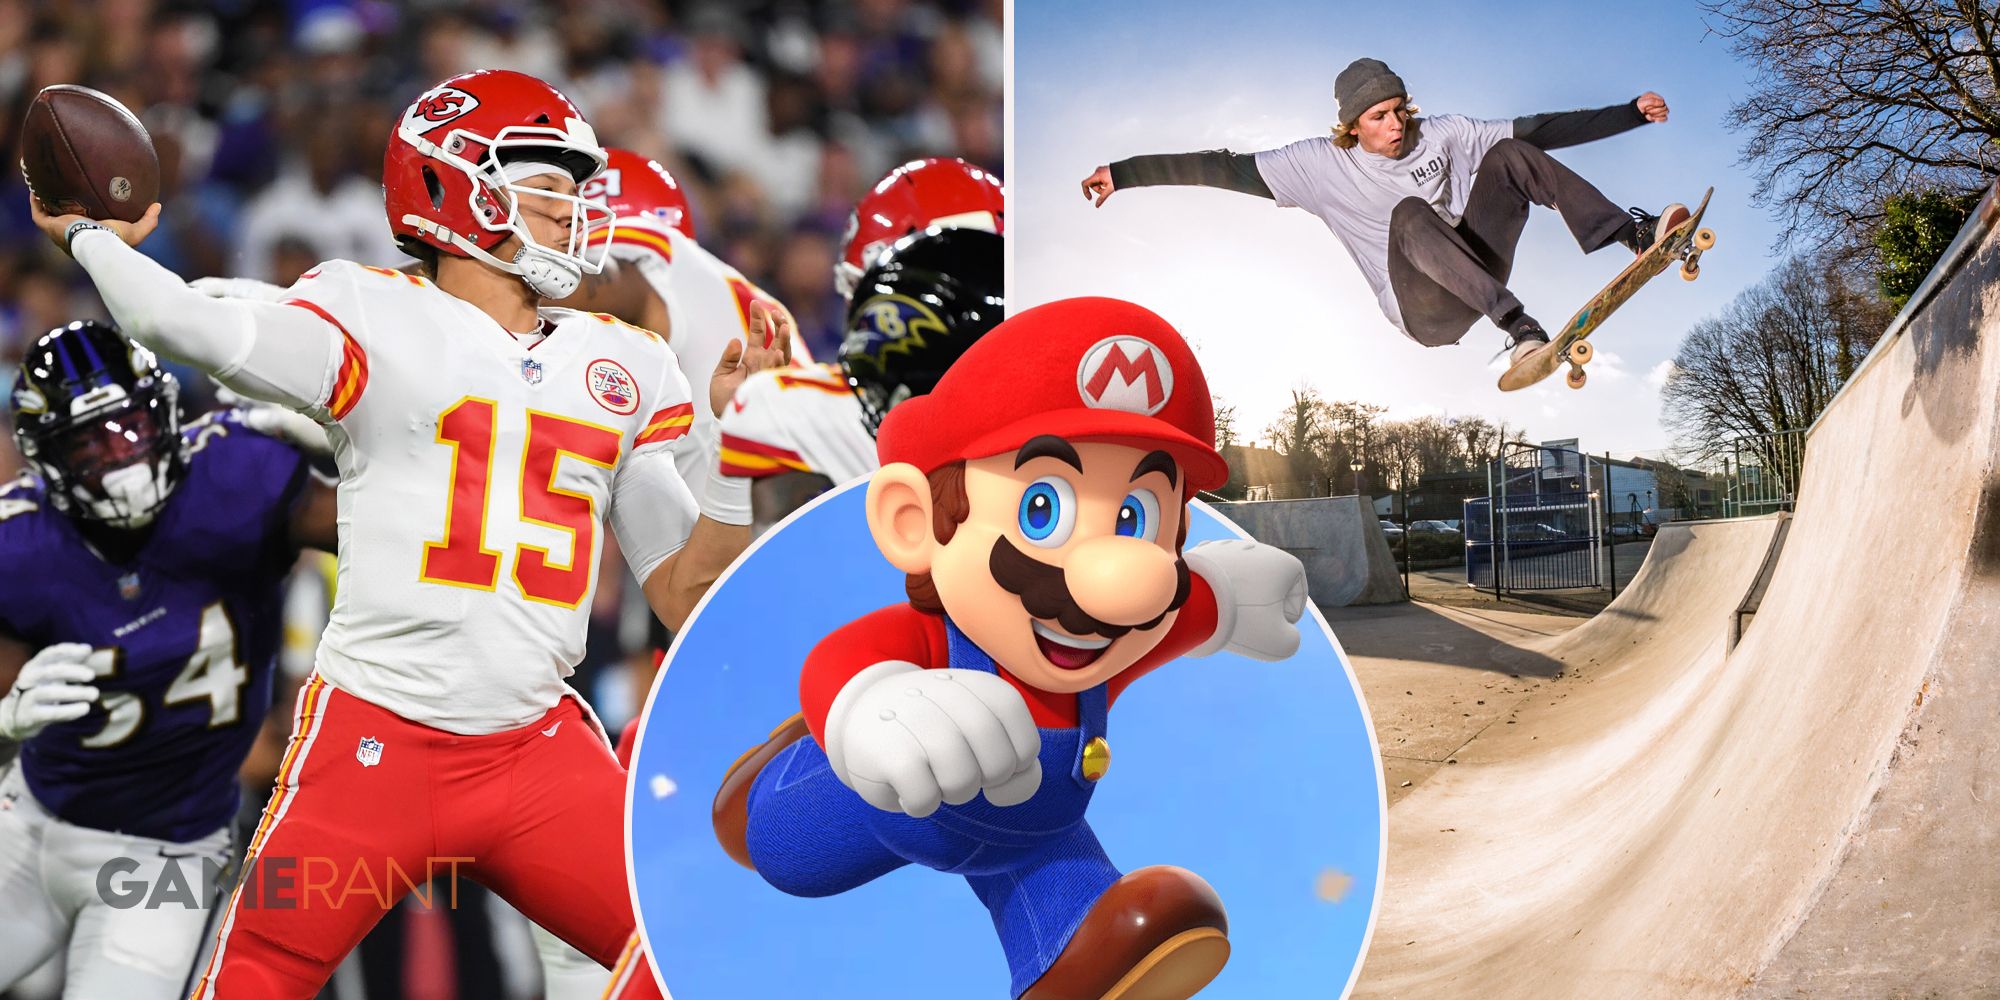 Kansas City Chiefs football player throwing the ball on the left, Mario smiling and jumping in middle, skateboarder on a ramp on right